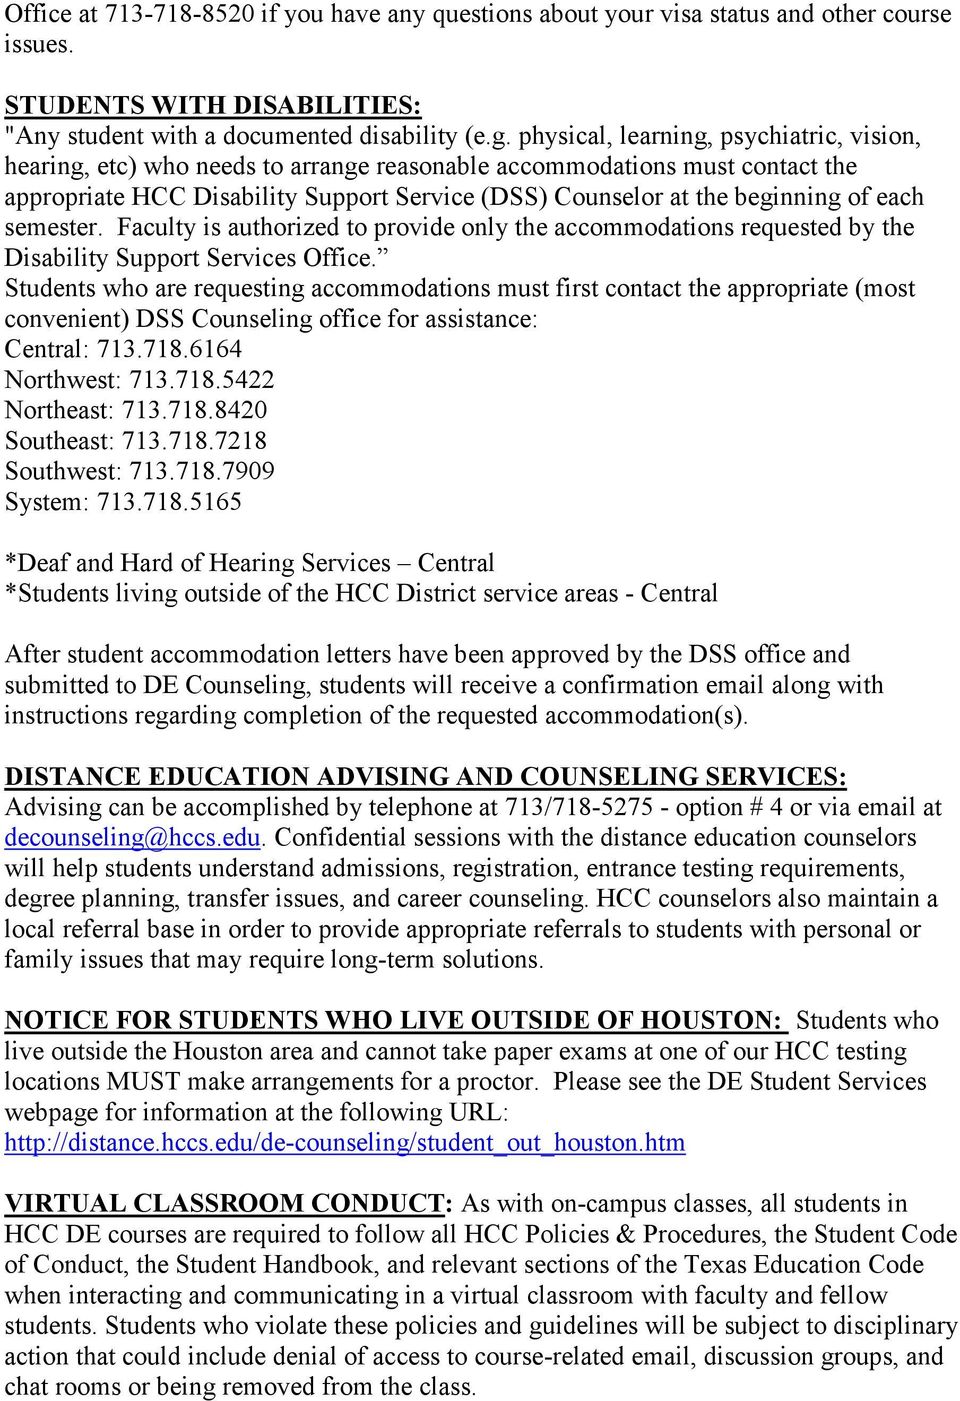 each semester. Faculty is authorized to provide only the accommodations requested by the Disability Support Services Office.